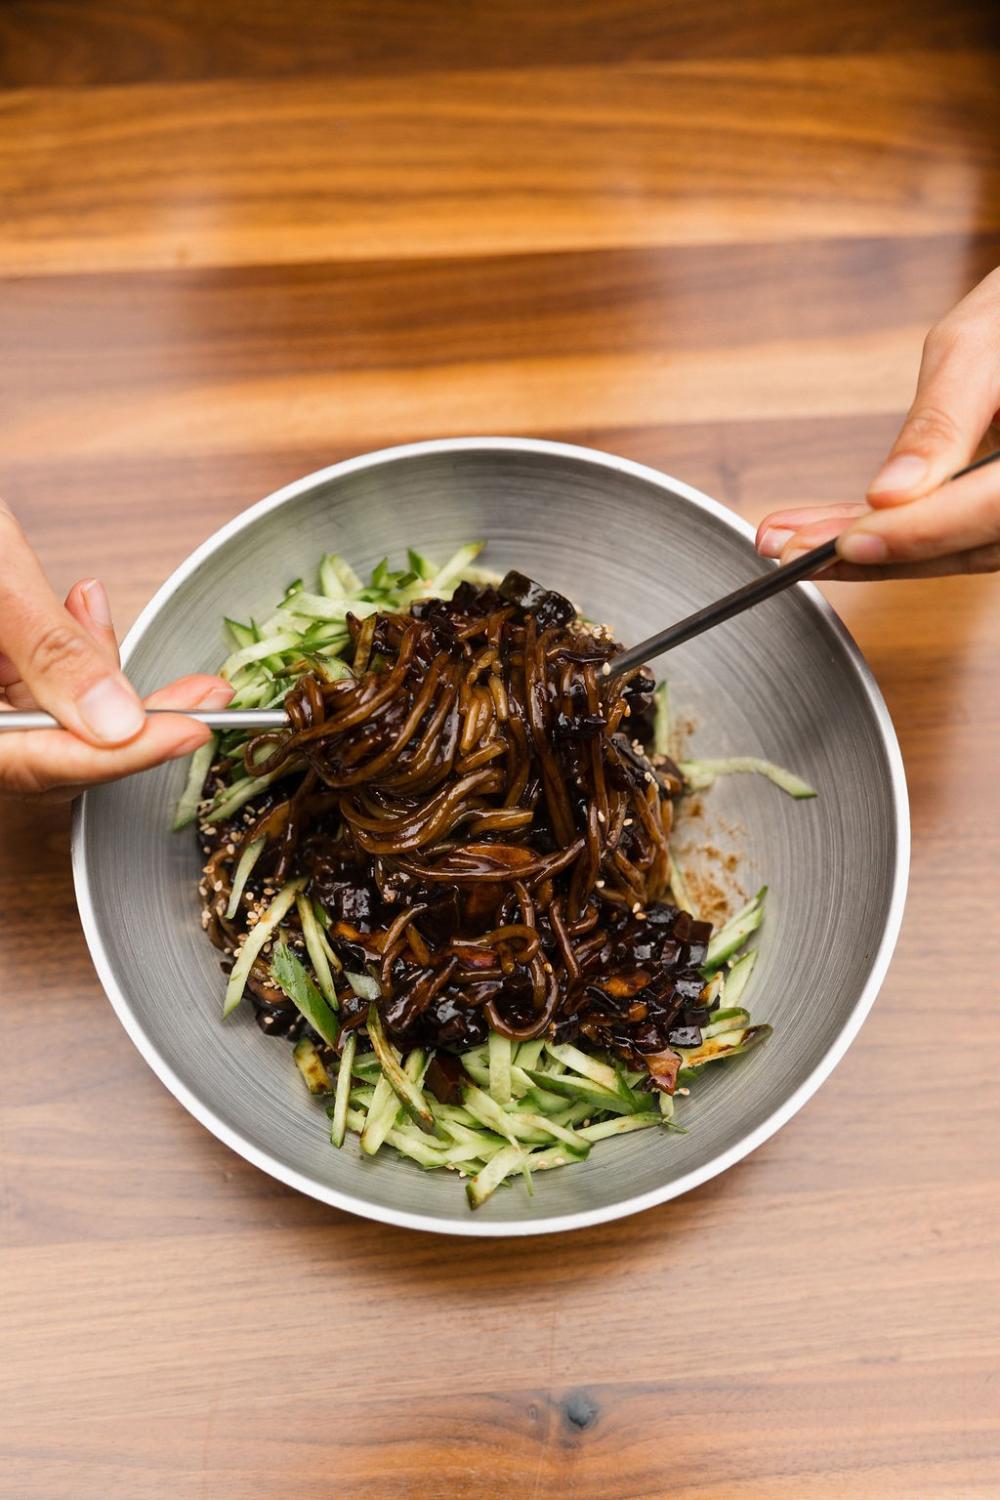 This is an image of the jjajangmyeon noodles at Jeju Kitchen in Carmel-by-the-Sea